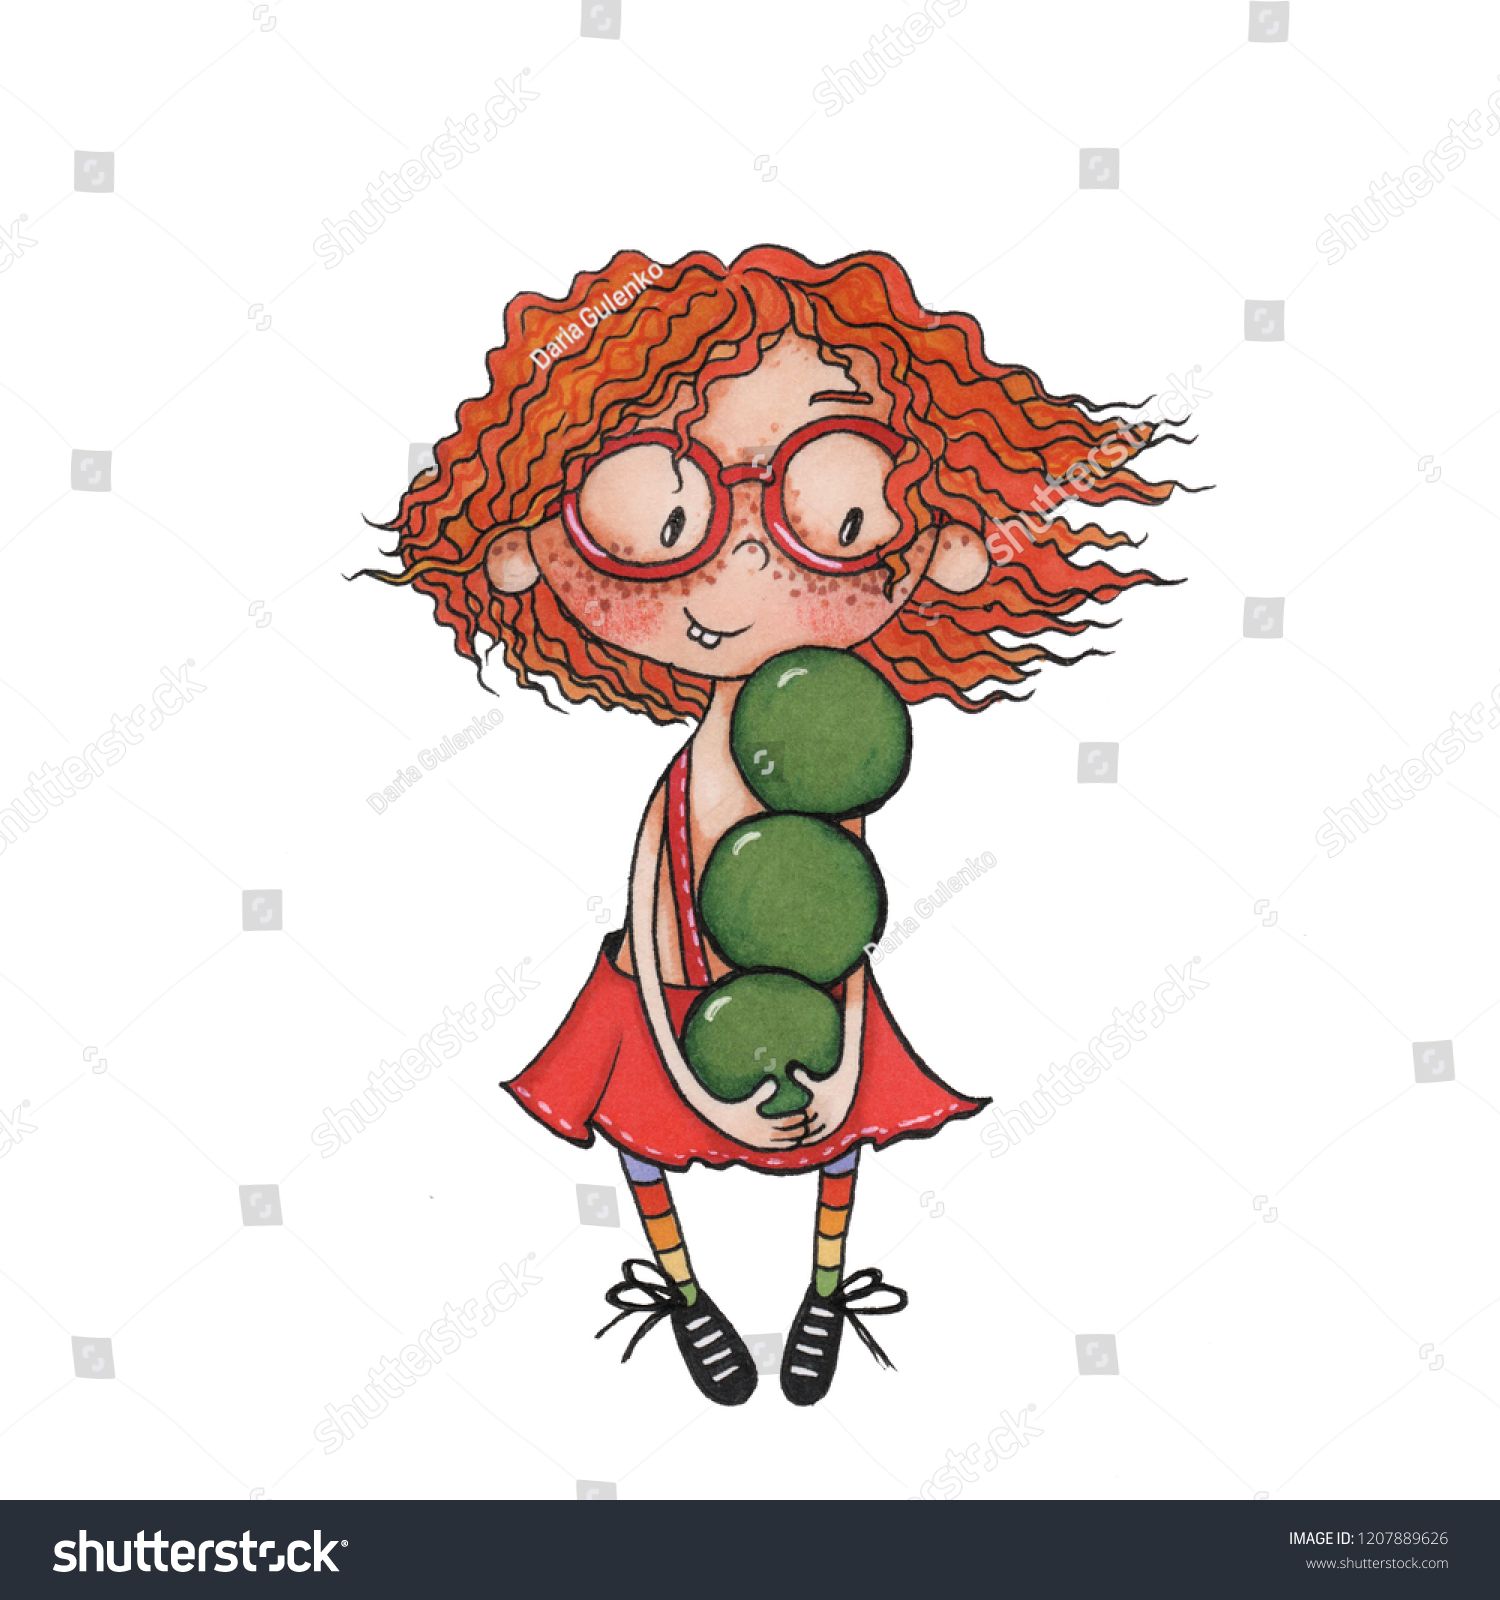 Cartoon Characters With Curly Hair And Glasses